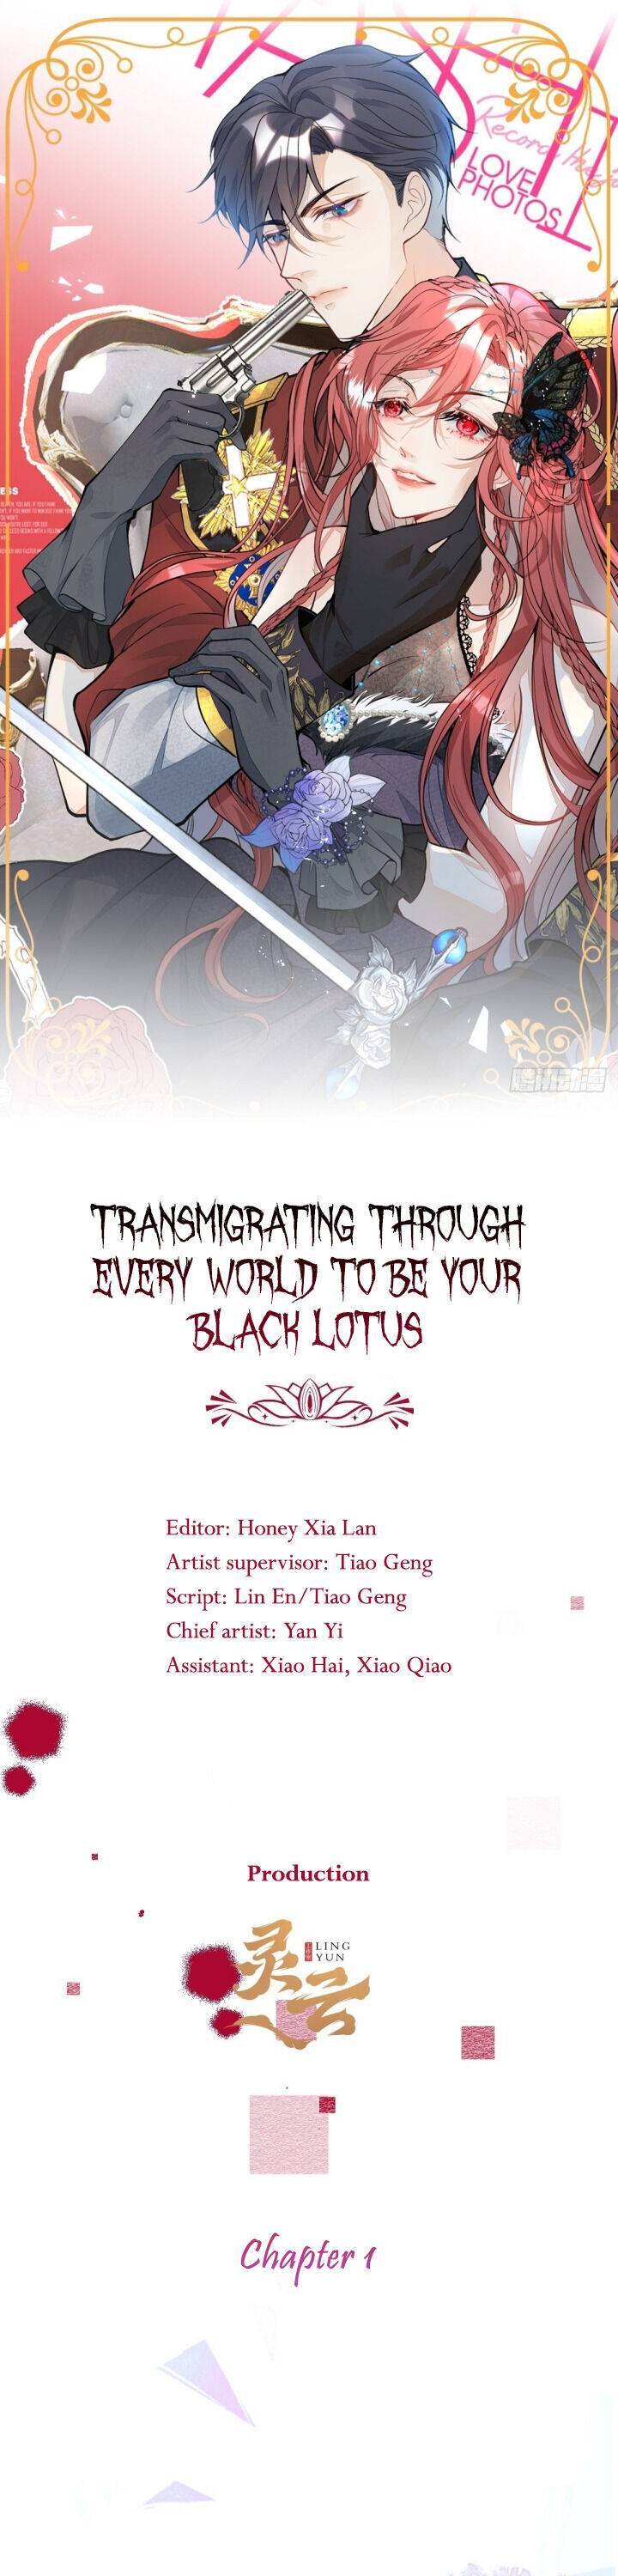 Transmigrating Through Every World To Be Your Black Lotus - Page 1